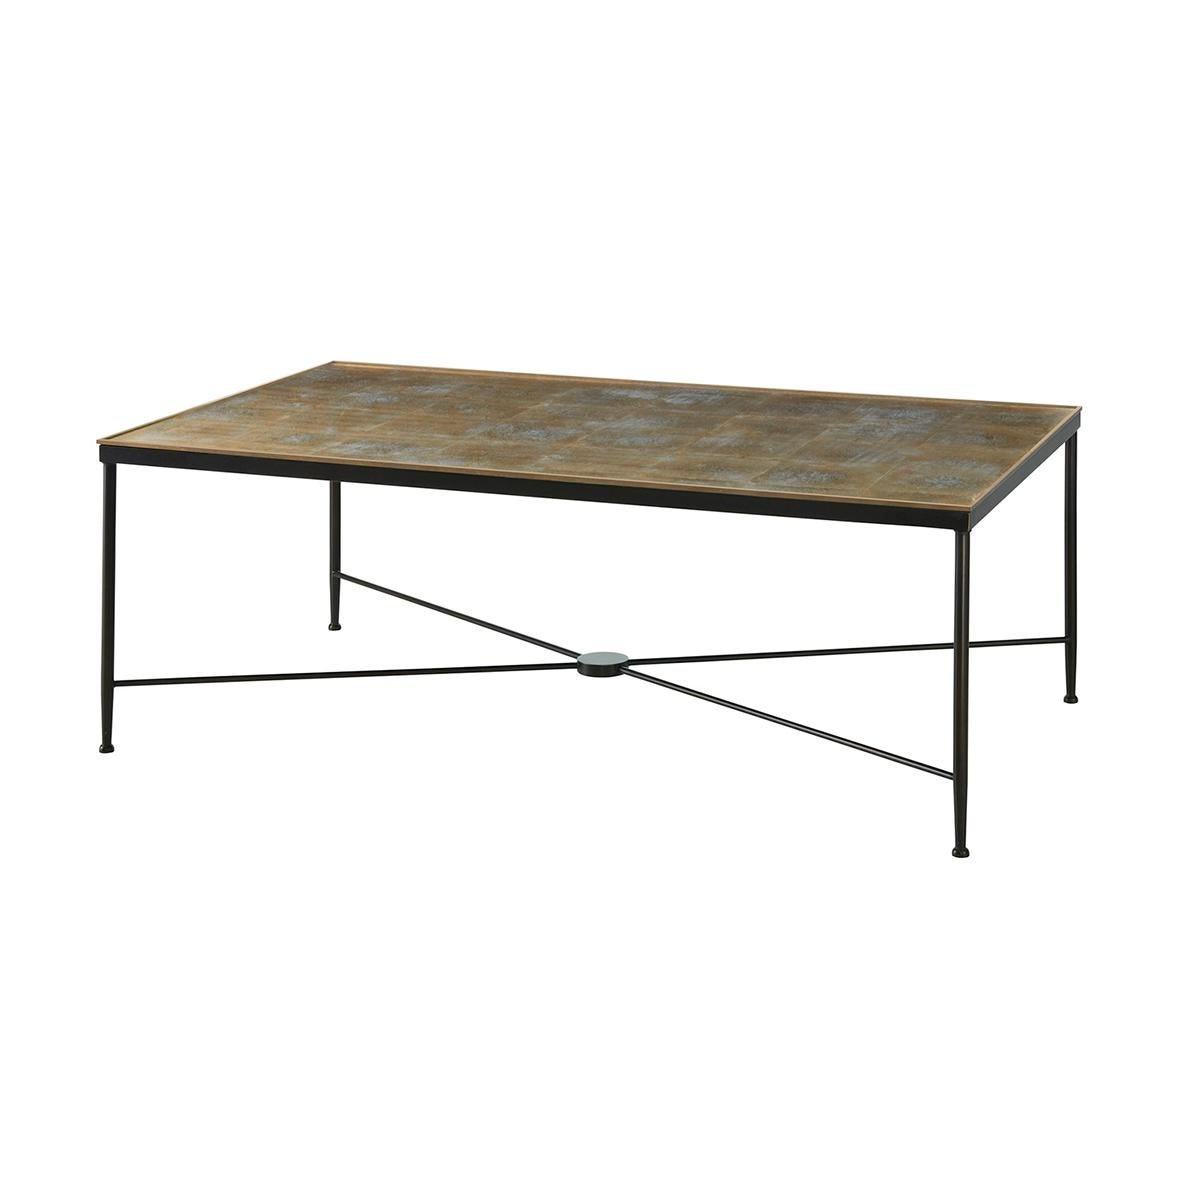 A midcentury Cocktail Table with Eglomisé Top with gold leaf etched details and a brass trim edge, above an ebonized wrought iron base with a X stretcher.

Dimensions: 50 W x 30 D x 18 H.